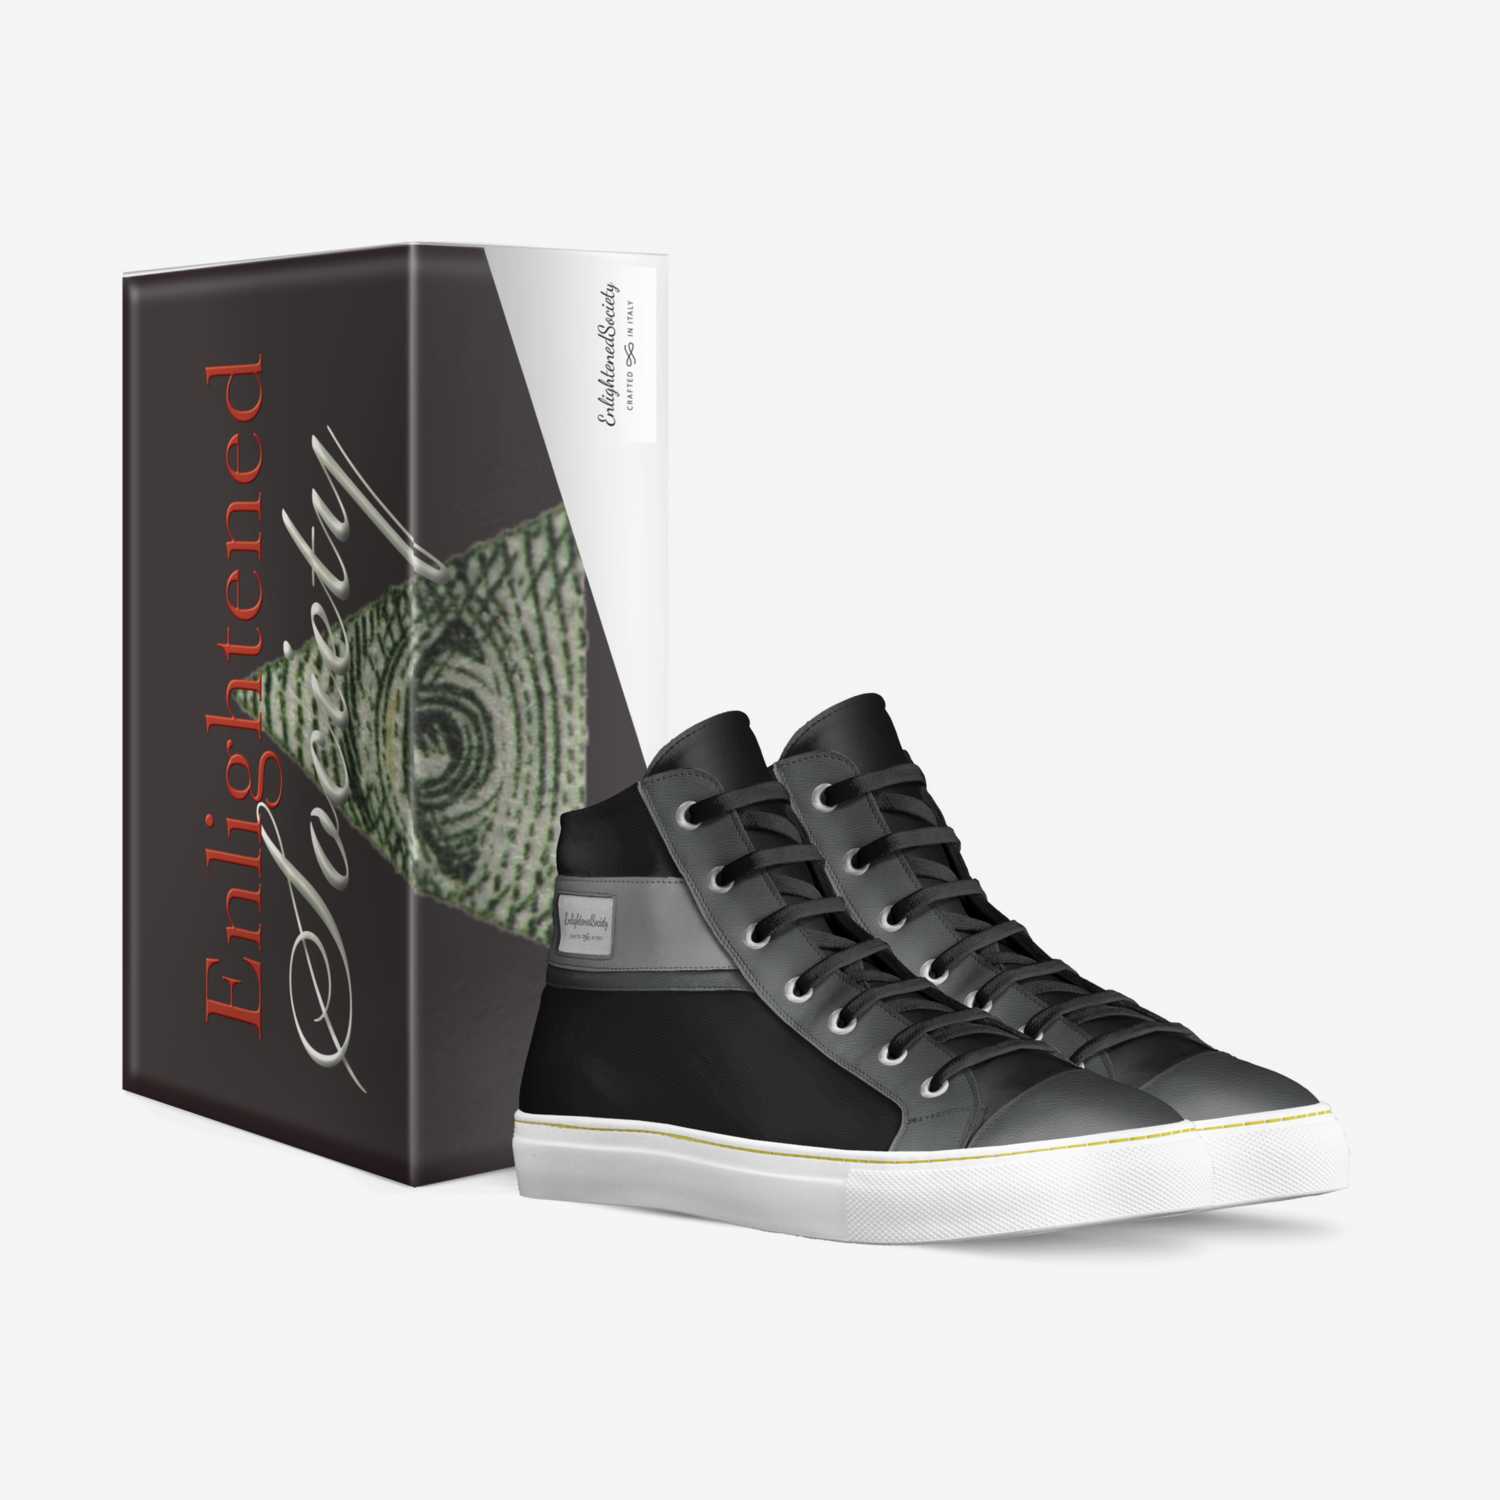 EnlightenedSociety custom made in Italy shoes by Jacob Coleman | Box view